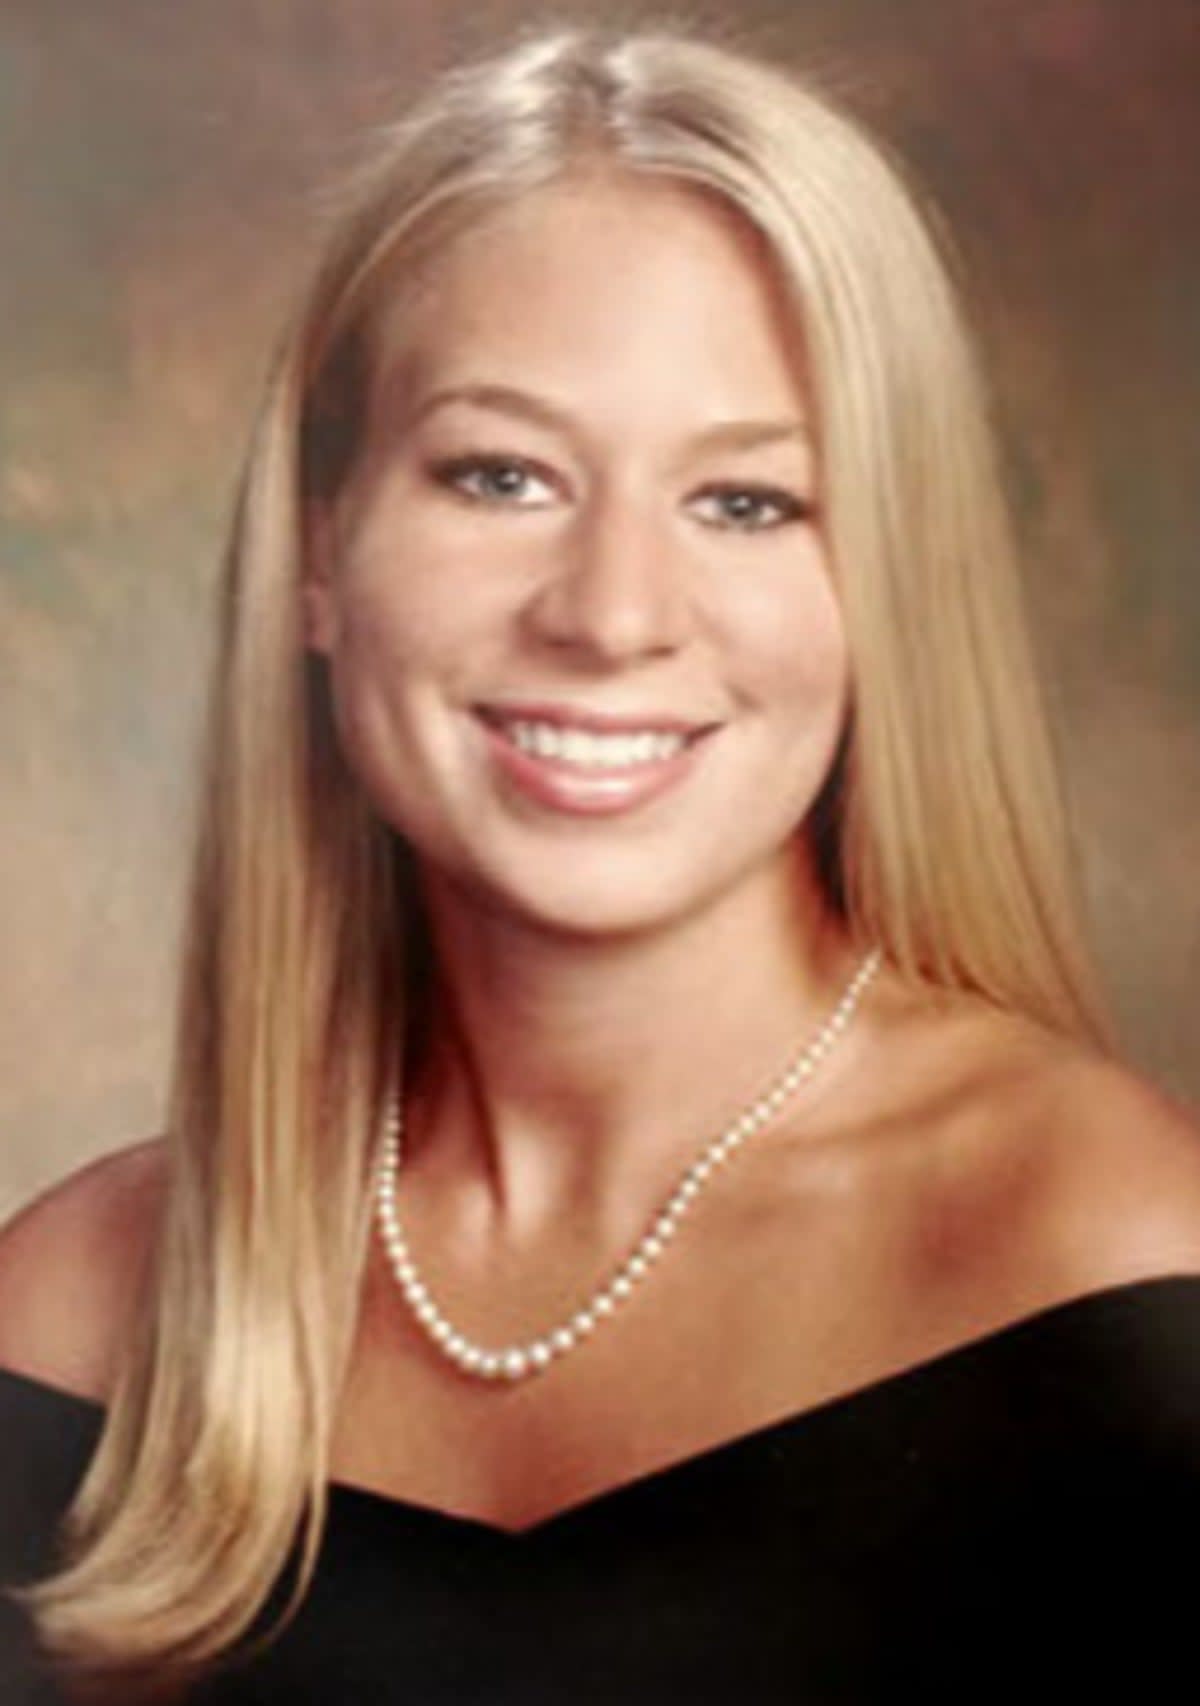 Natalee Holloway has been missing since 2005 (via AP)